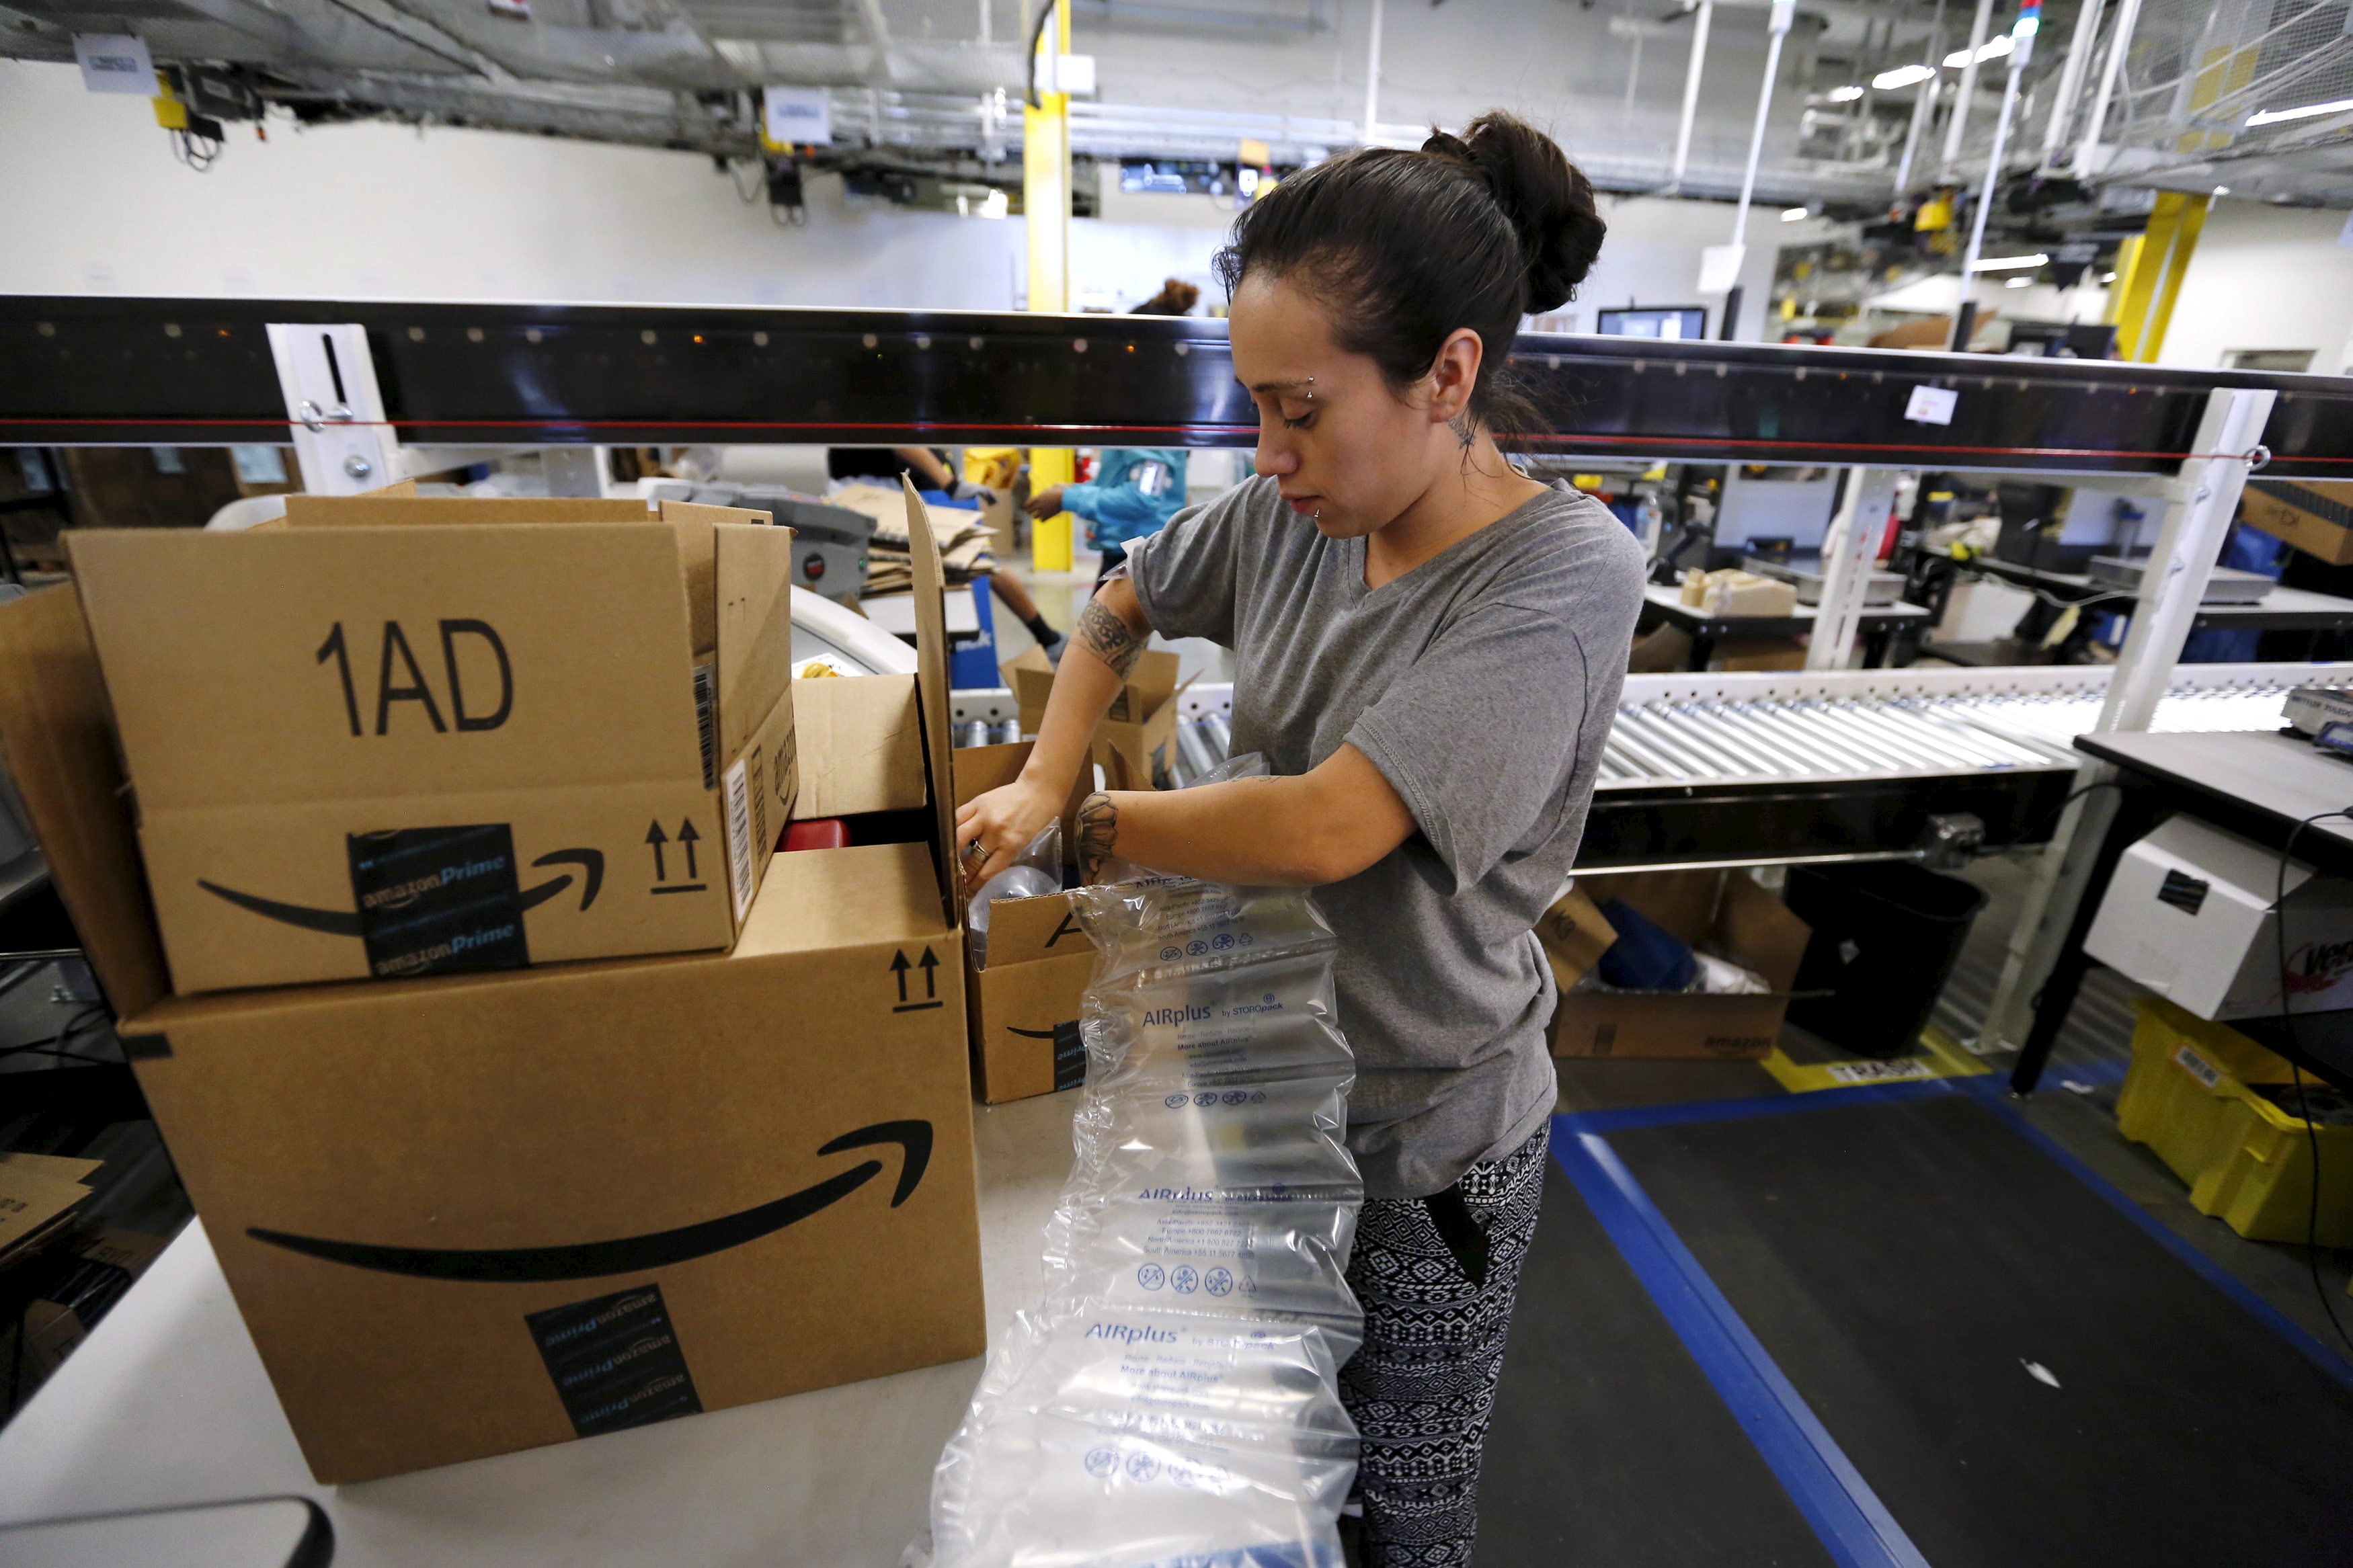 Monica Galvan secures customers'orders with bubble wrap before they are shipped at the Amazon Fulfillment Center in Tracy, Calif., Nov. 29, 2015. (Fred Greaves—Reuters)